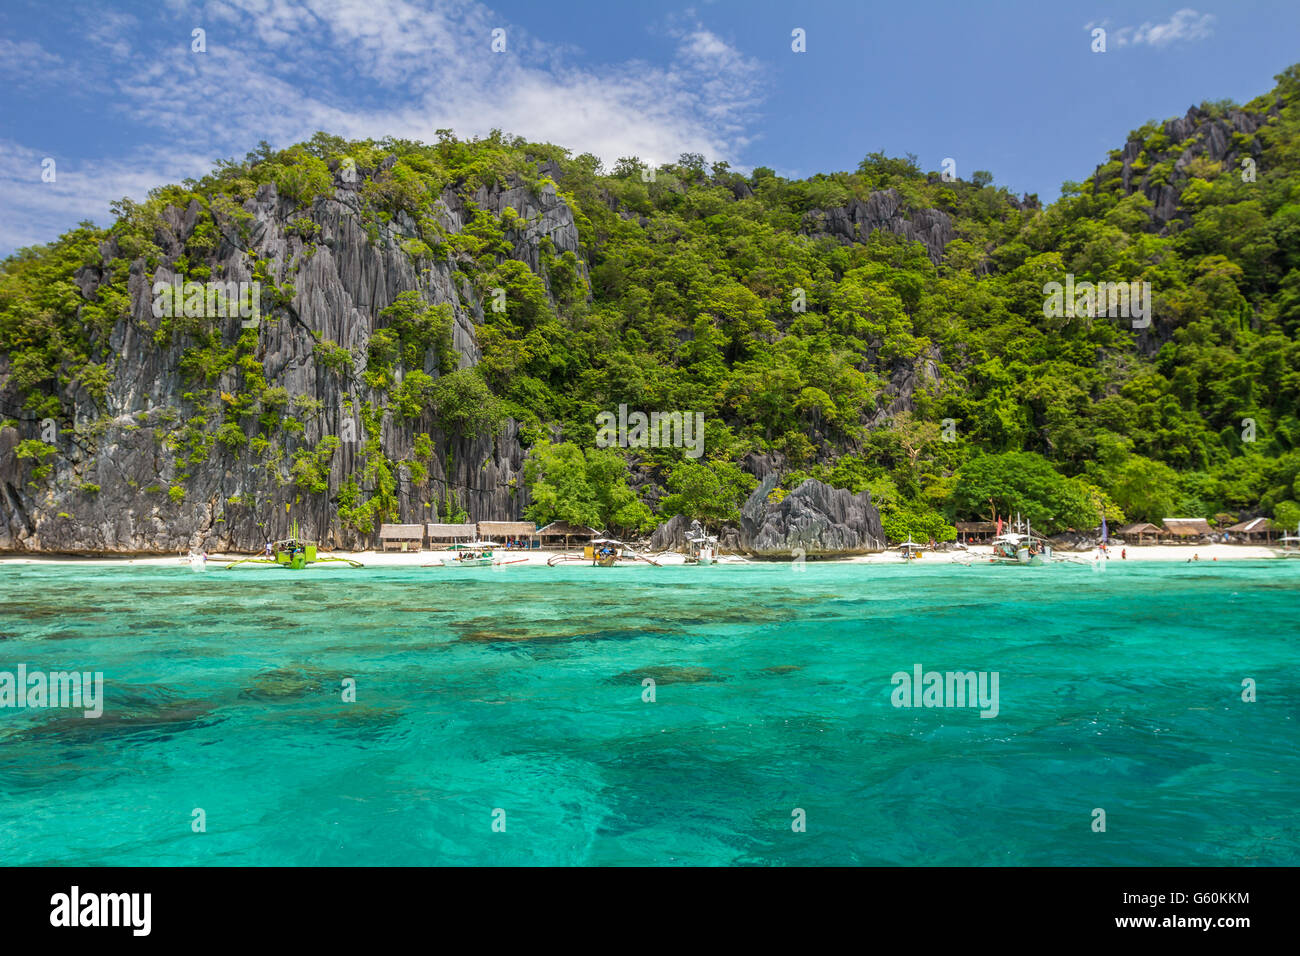 Palawan Island in the Philippines Stock Photo